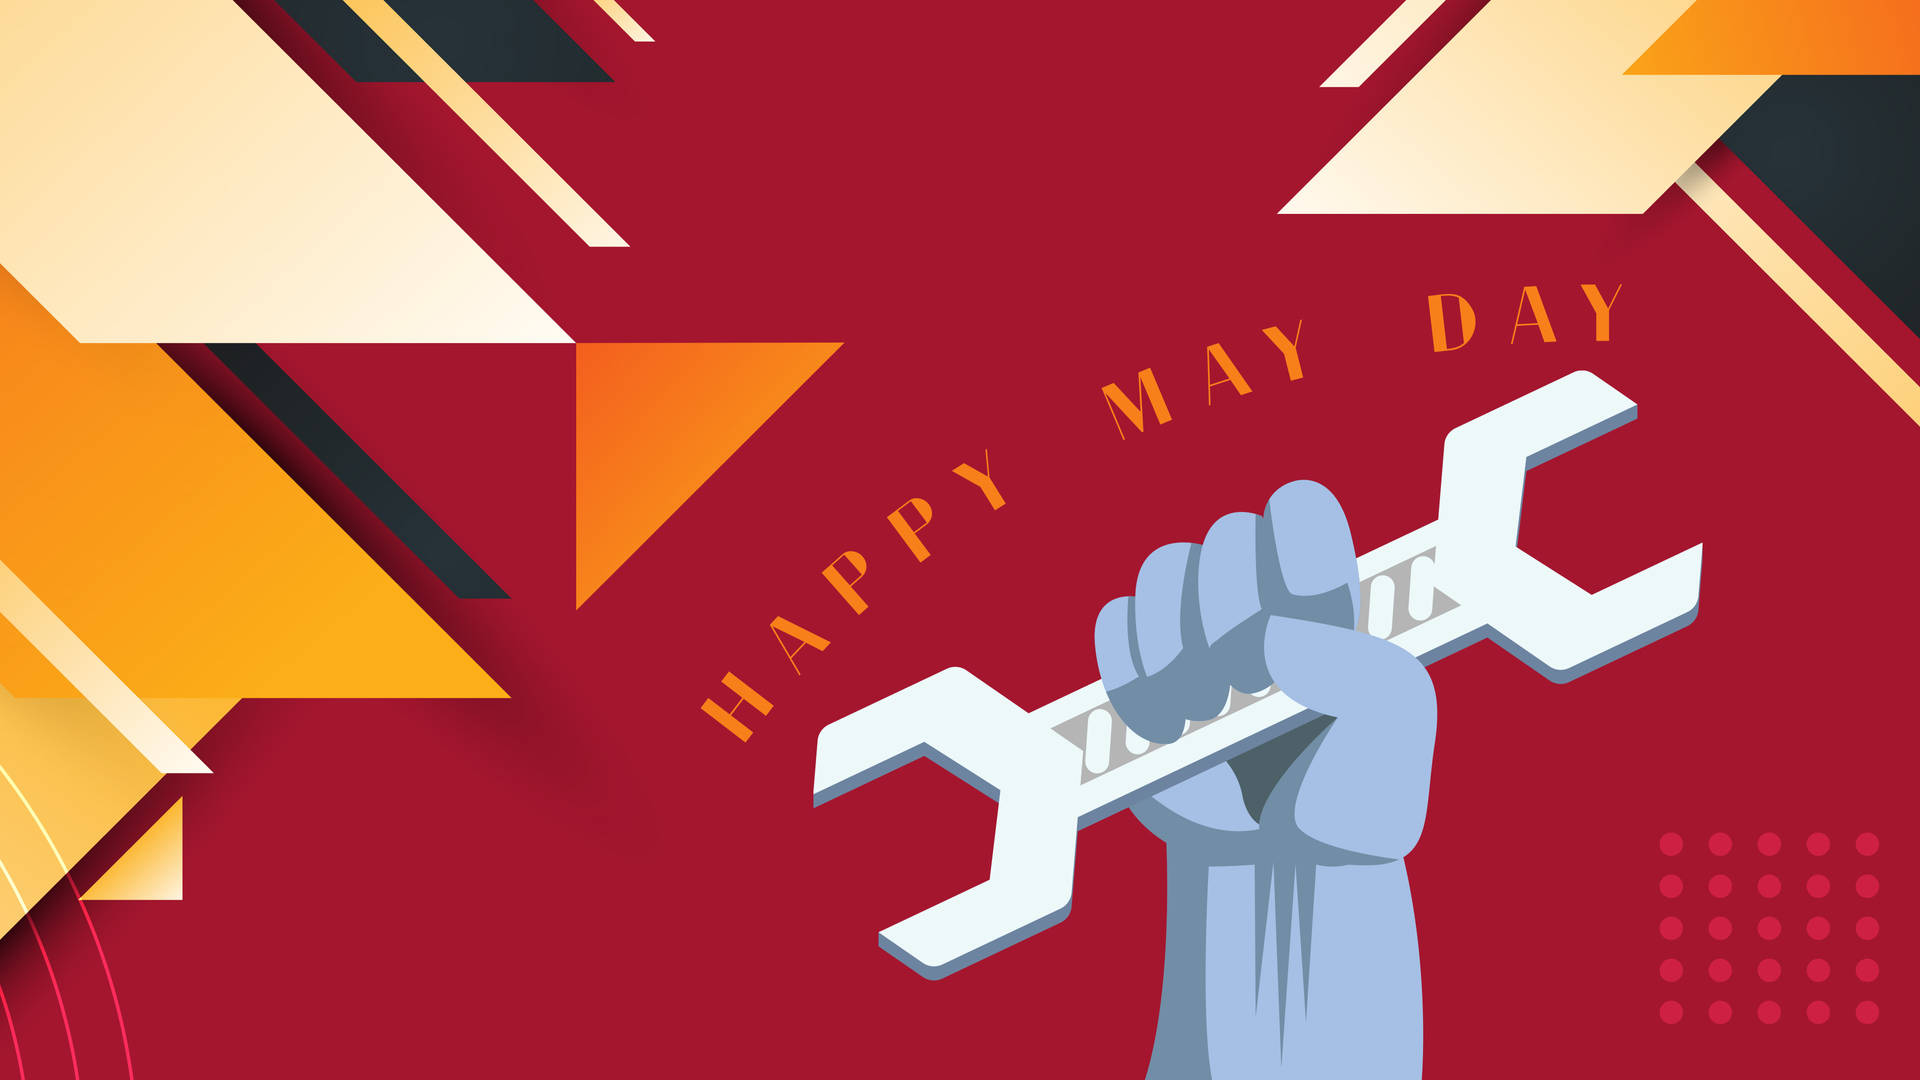 May Day Abstract Design